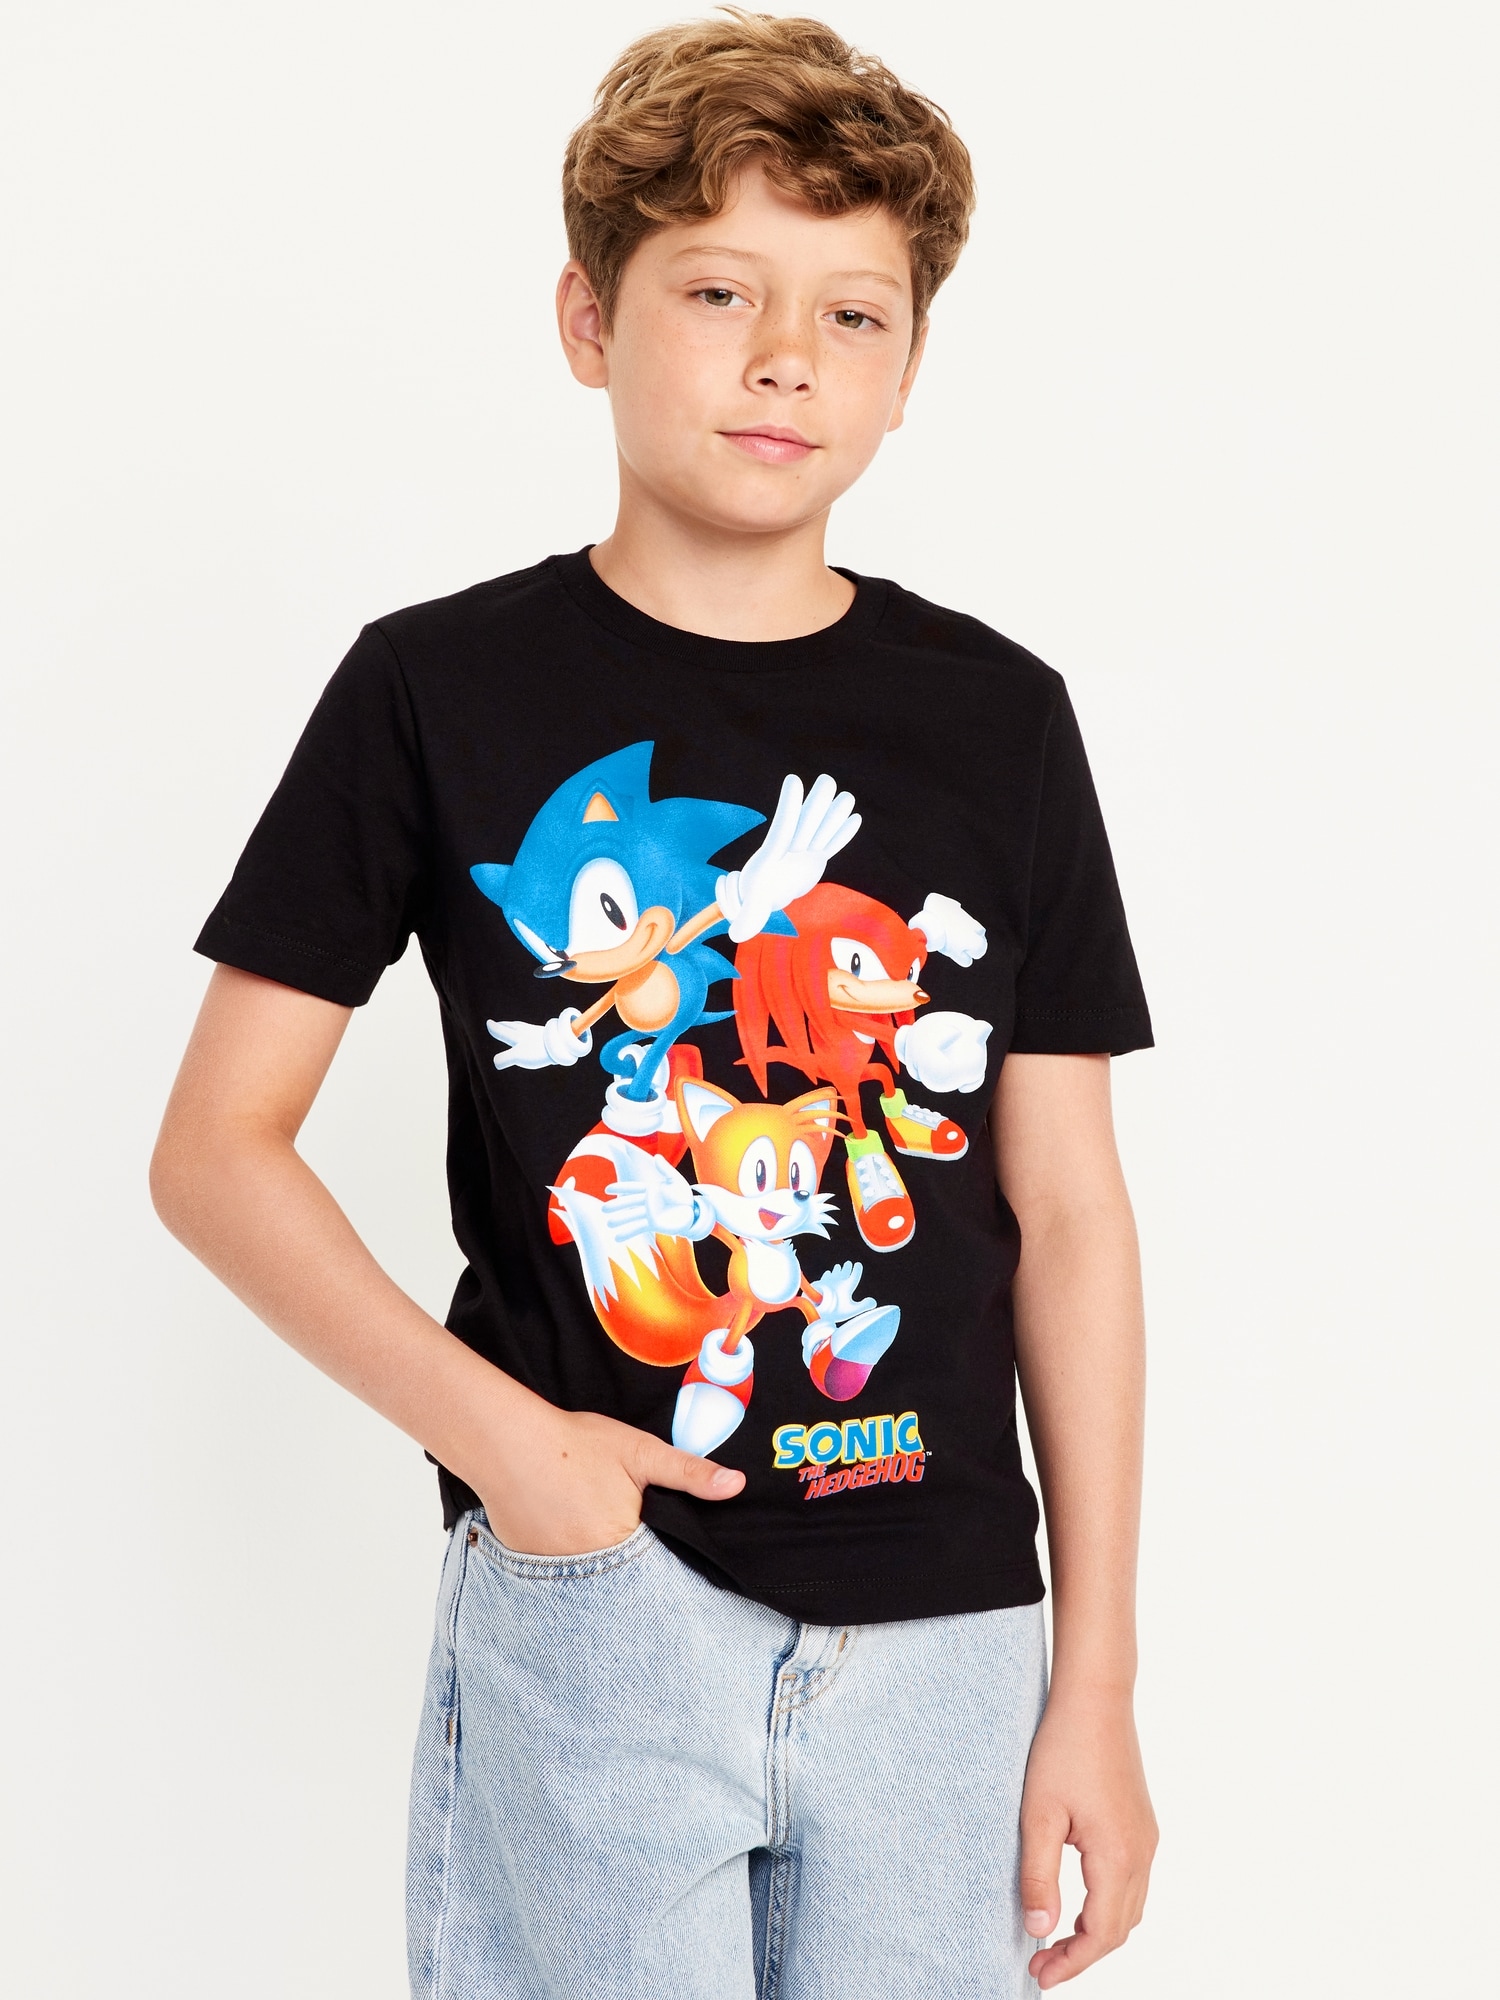 Sonic The Hedgehog™ Gender-Neutral Graphic T-Shirt for Kids